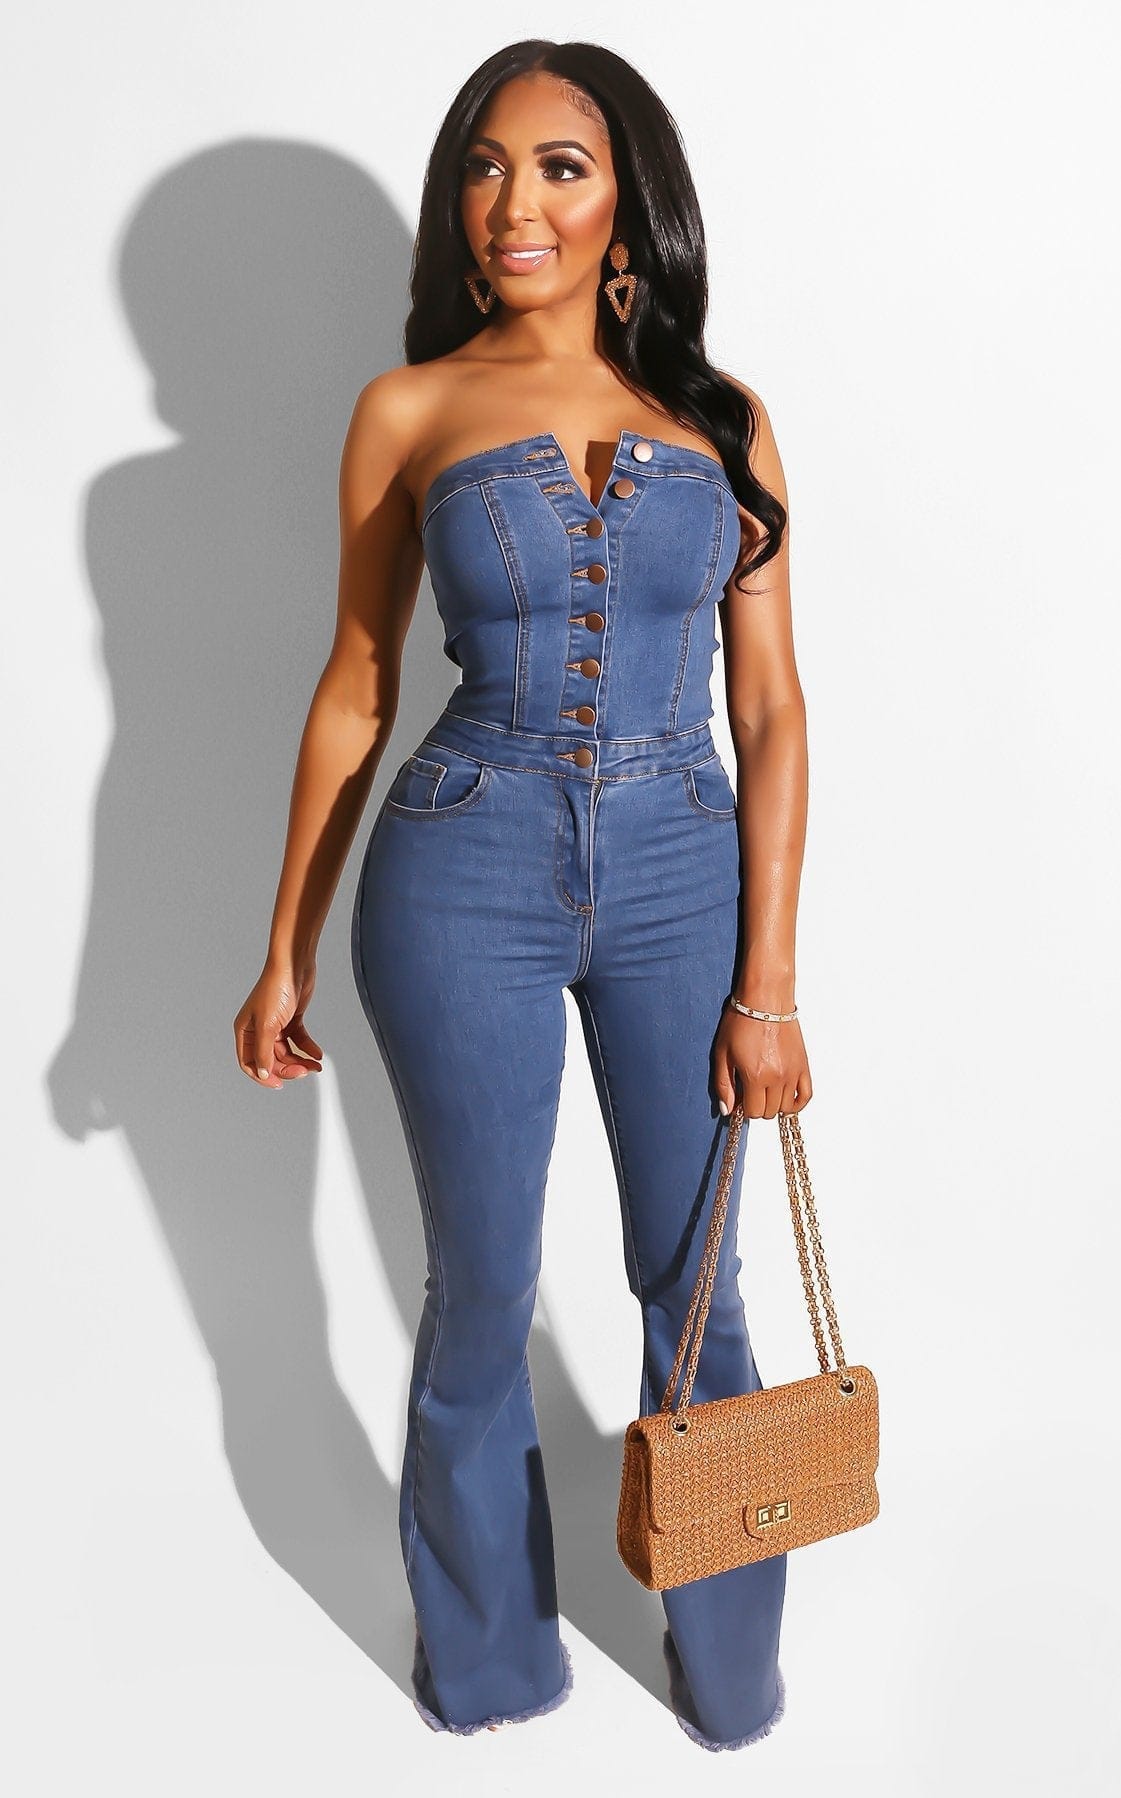 WMNS Jumpsuit - Wrap Front Tank Top / Genie Style Legs / Cinched